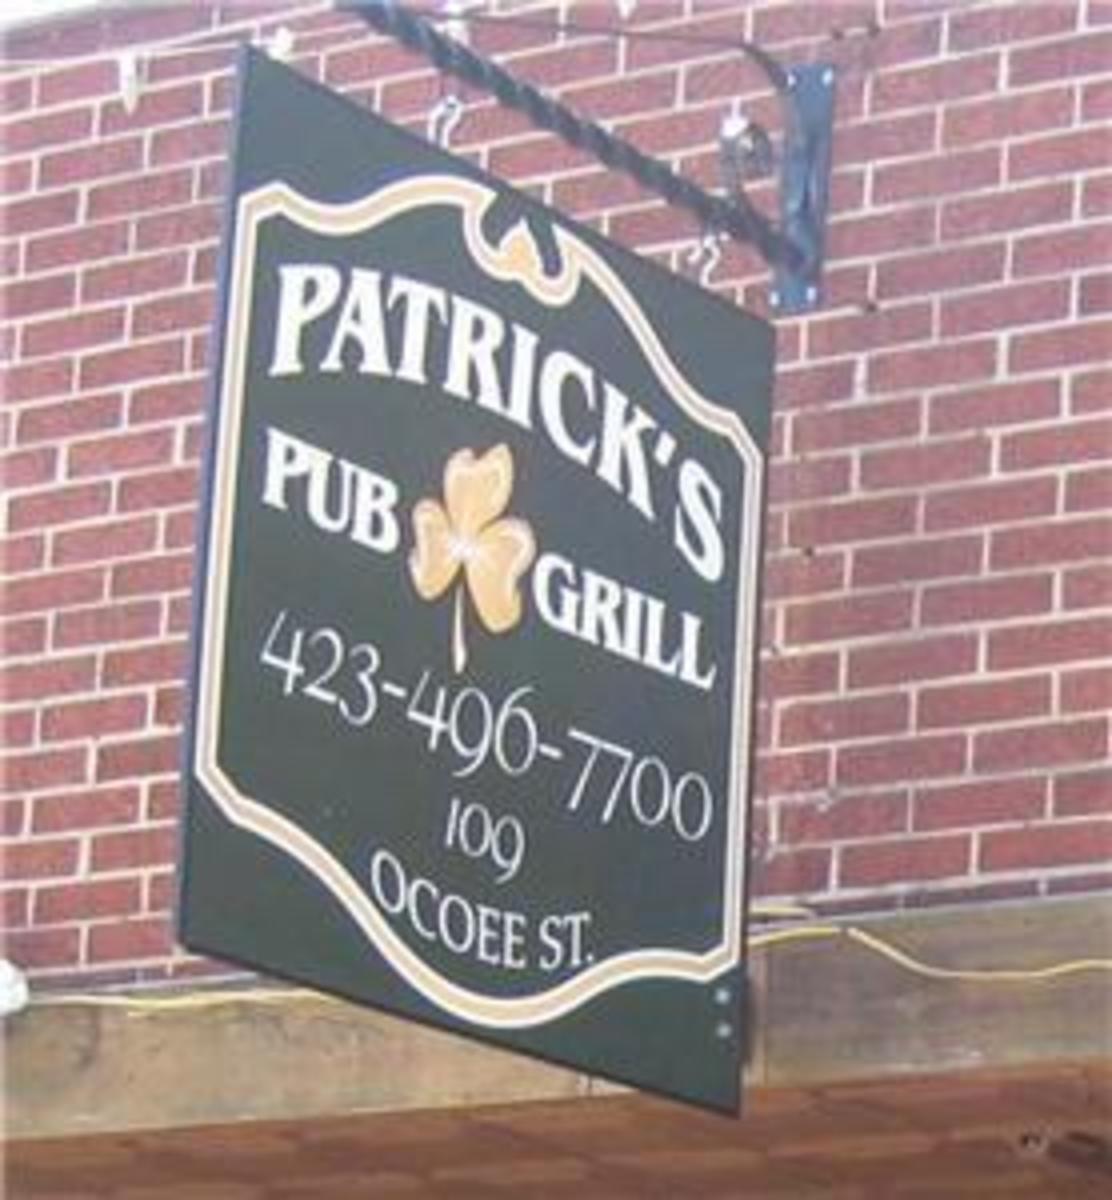 Partick's Pub & Grill, where you can practically be in two places at once!